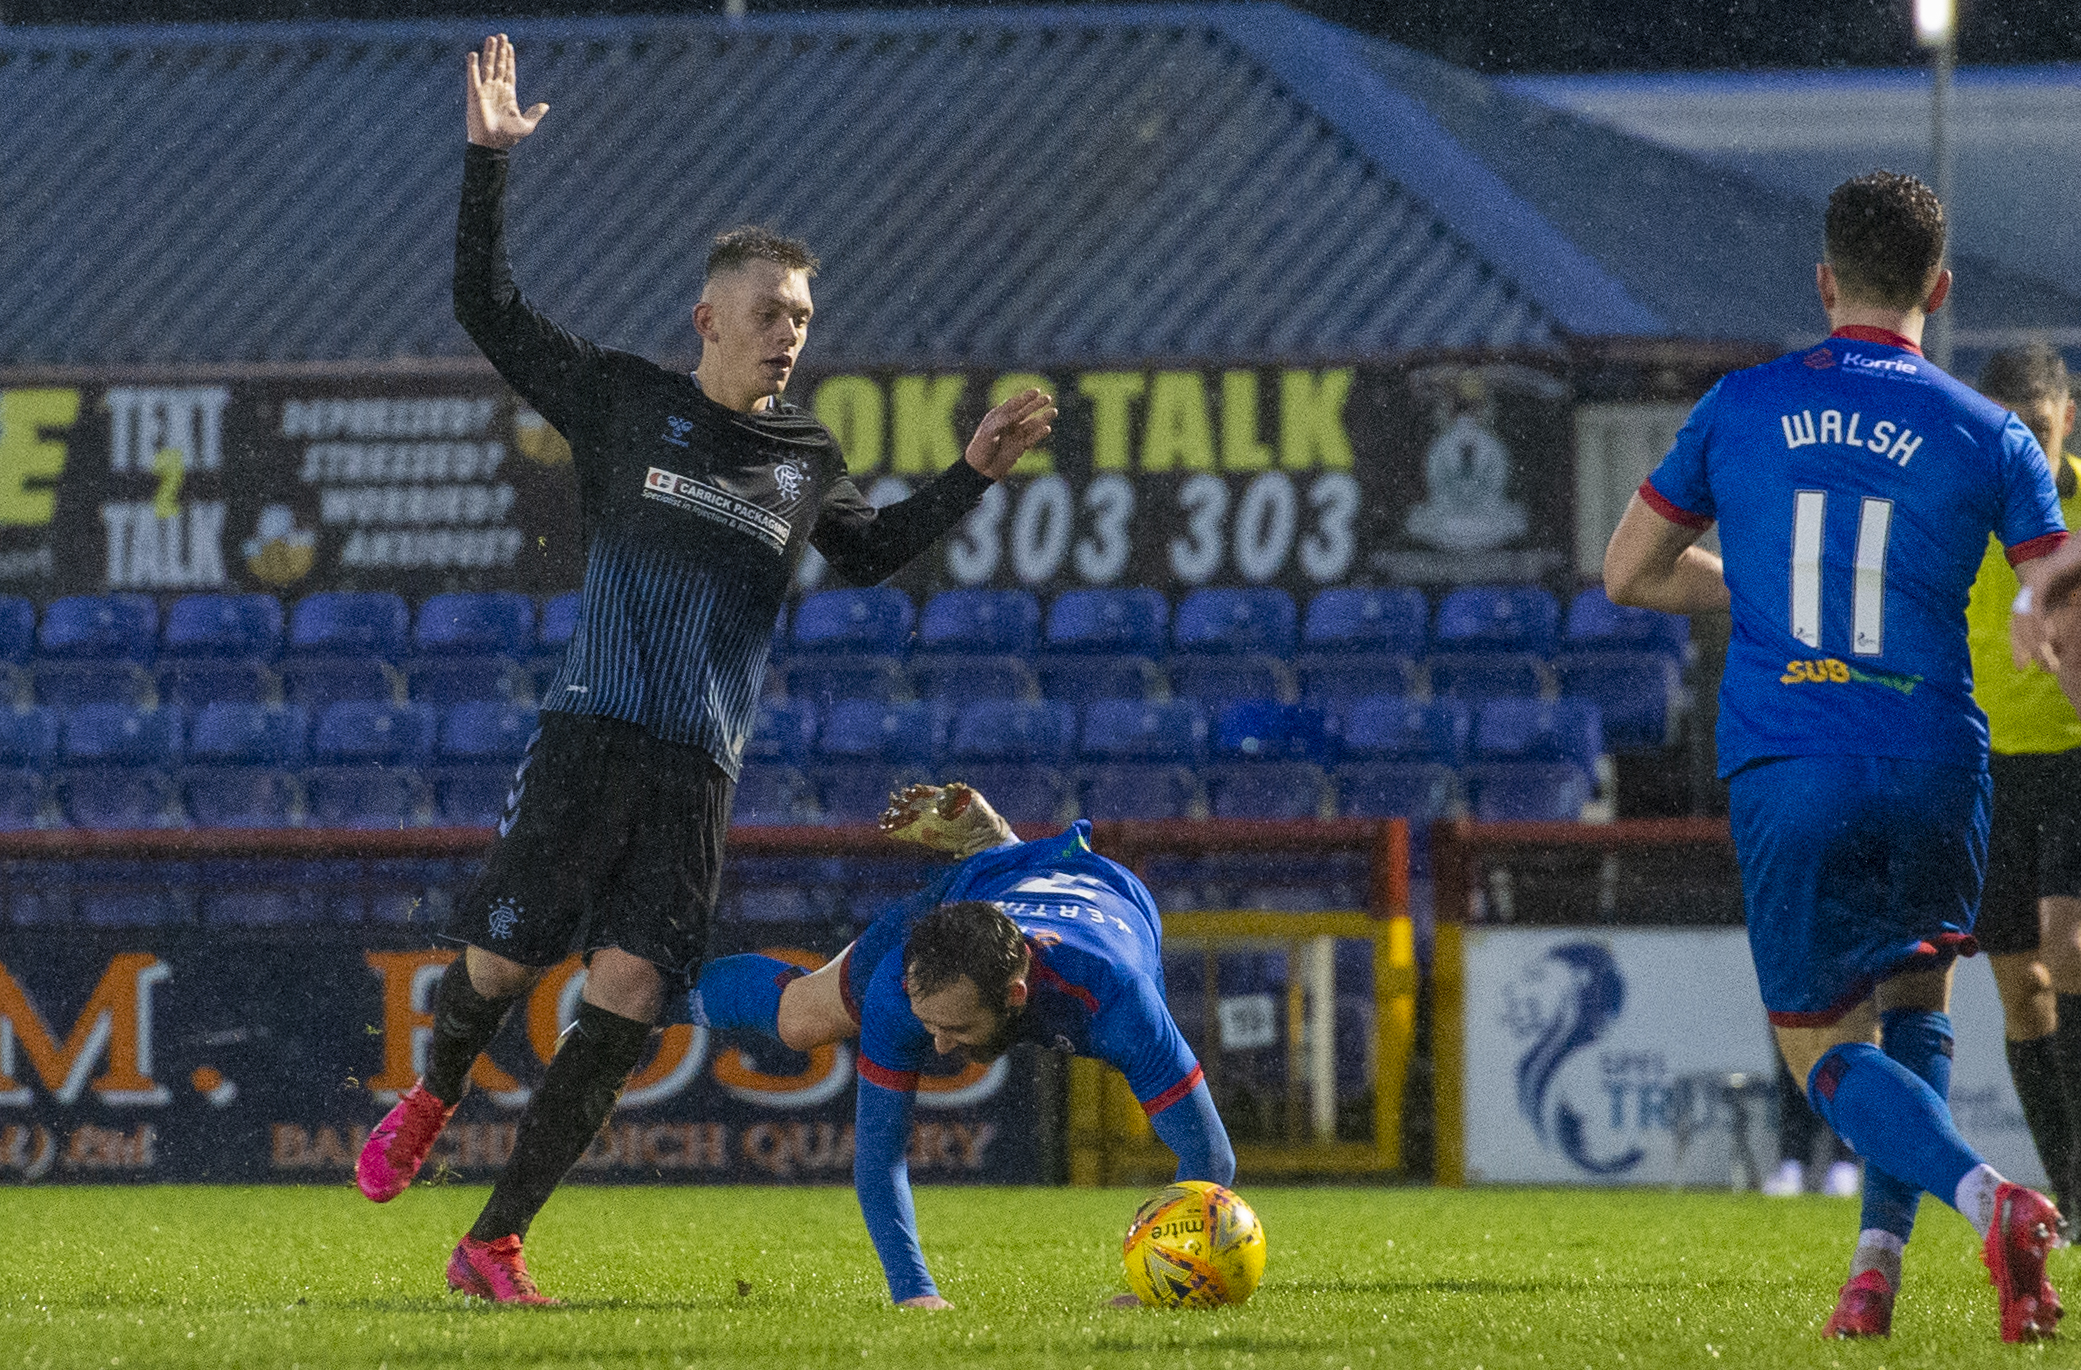 Keatings went down after apparent contact from Rangers' Ciaran Dickson.